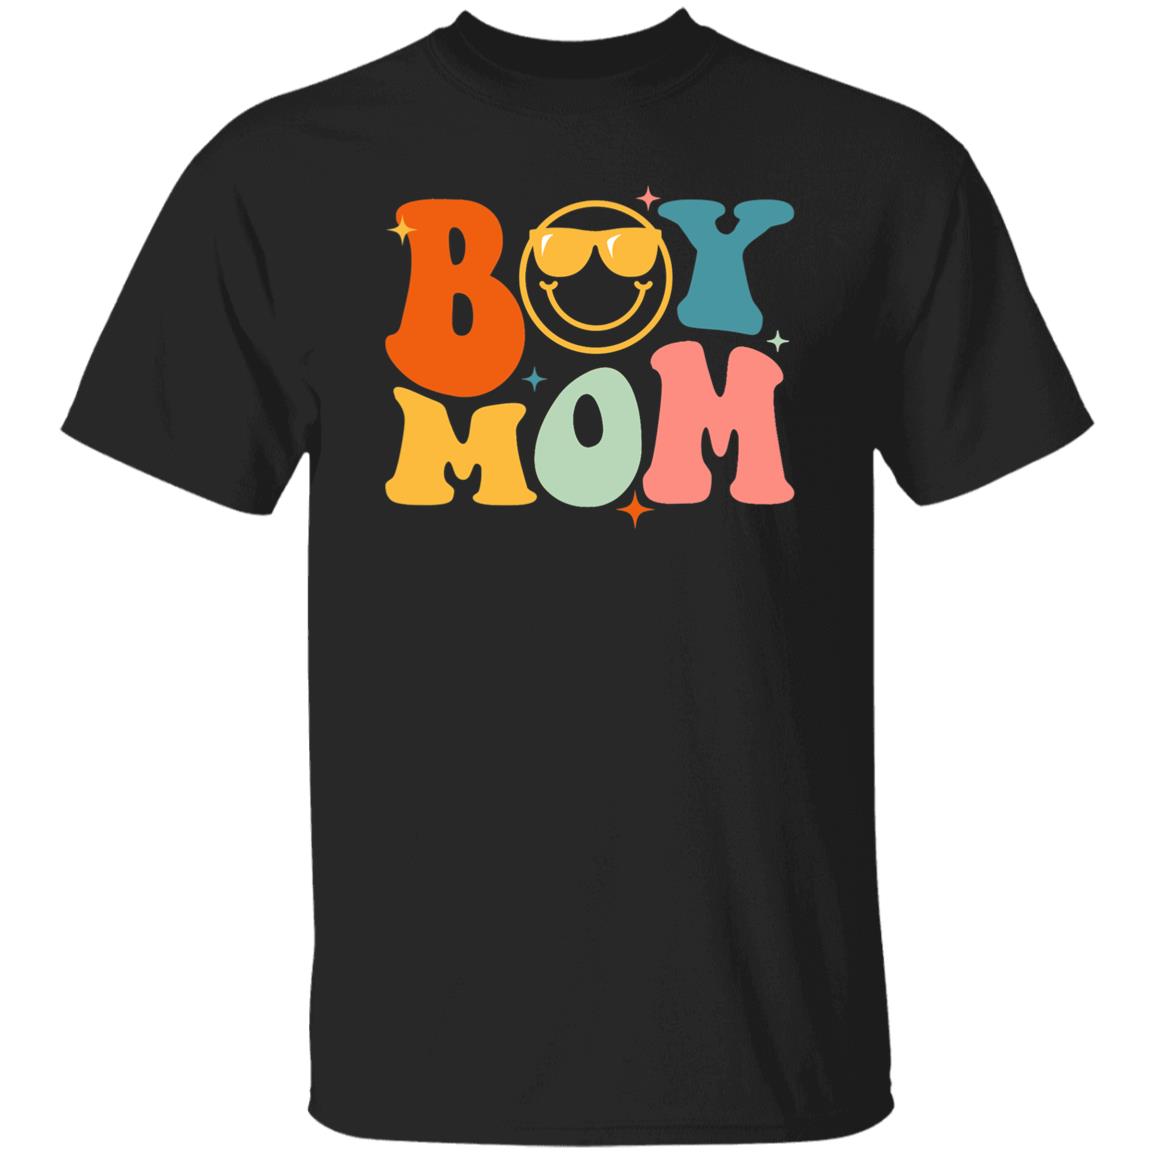 Retro Hippie Boy Mom Mother of Boys Funny Shirt for Mother's Day